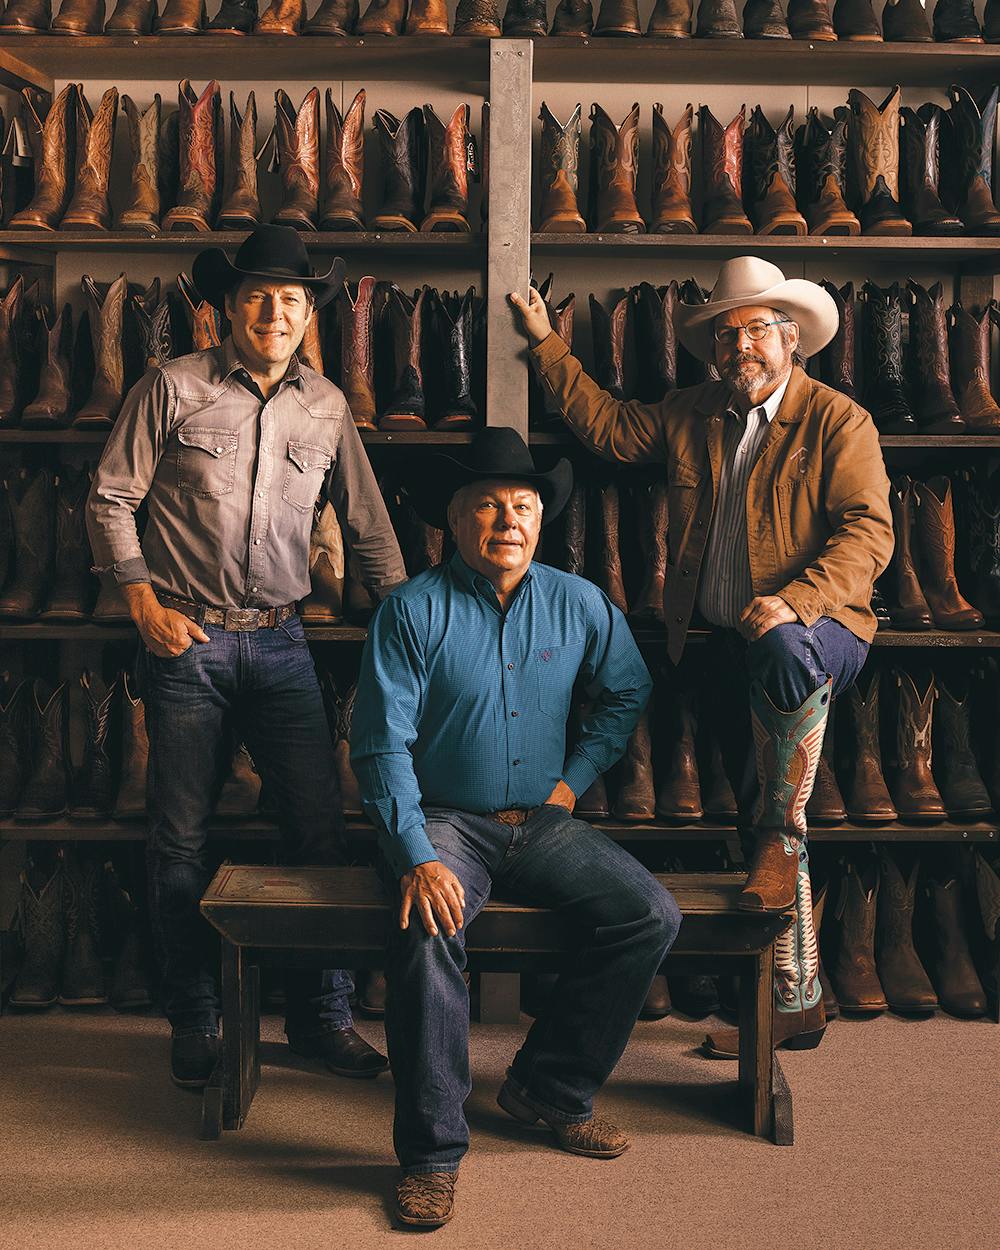 The Cavendar brothers sporting their boots: Clay in Lucchese boots, Joe in Old Gringos, and Mike in Rocketbusters.